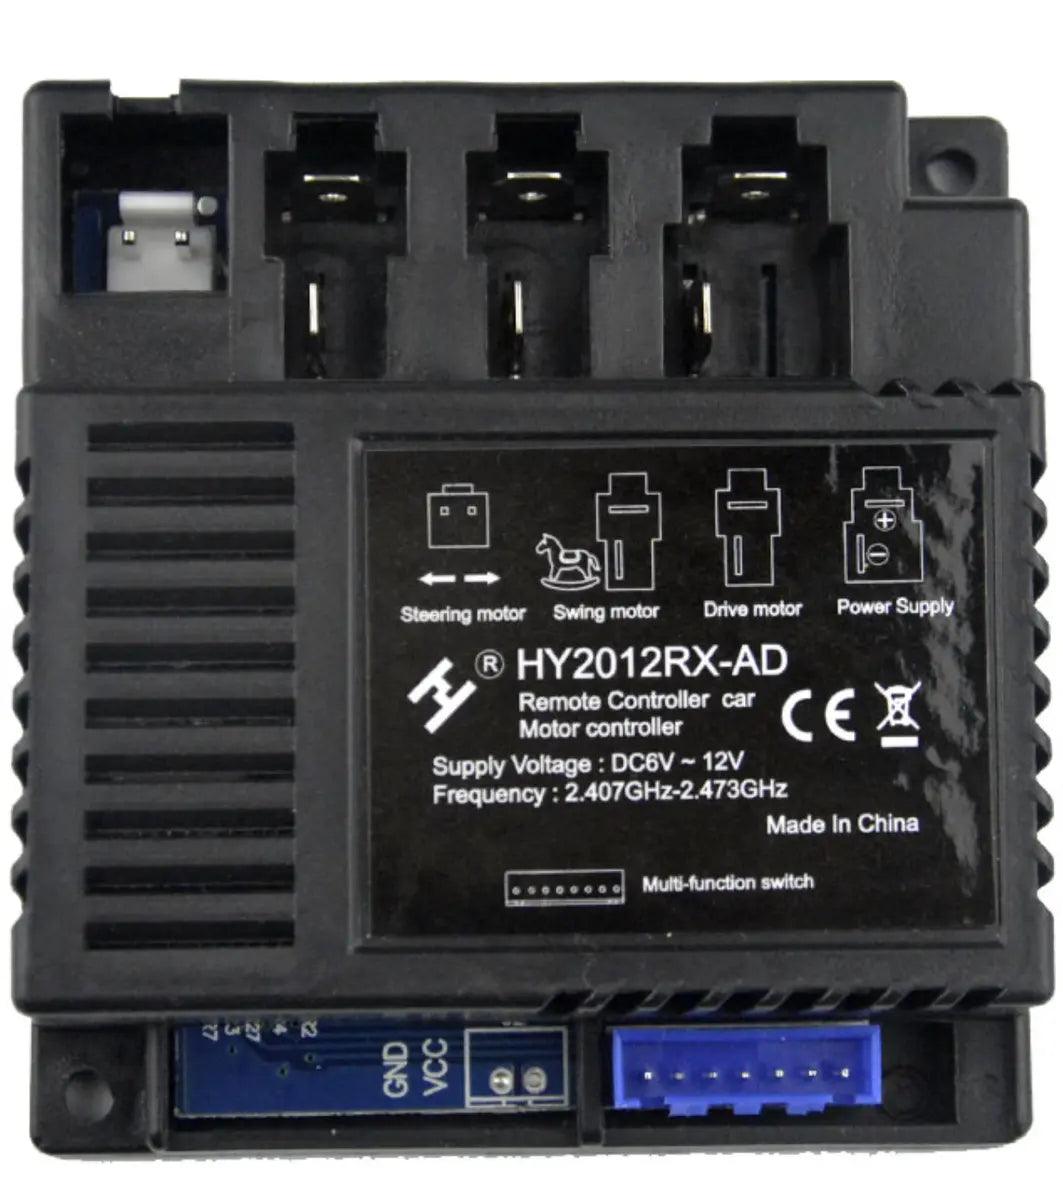 PATOYS | HY2012RX-AD Receiver Control Box Motherboard for Children Electric Car Controller/ Motherboard PATOYS